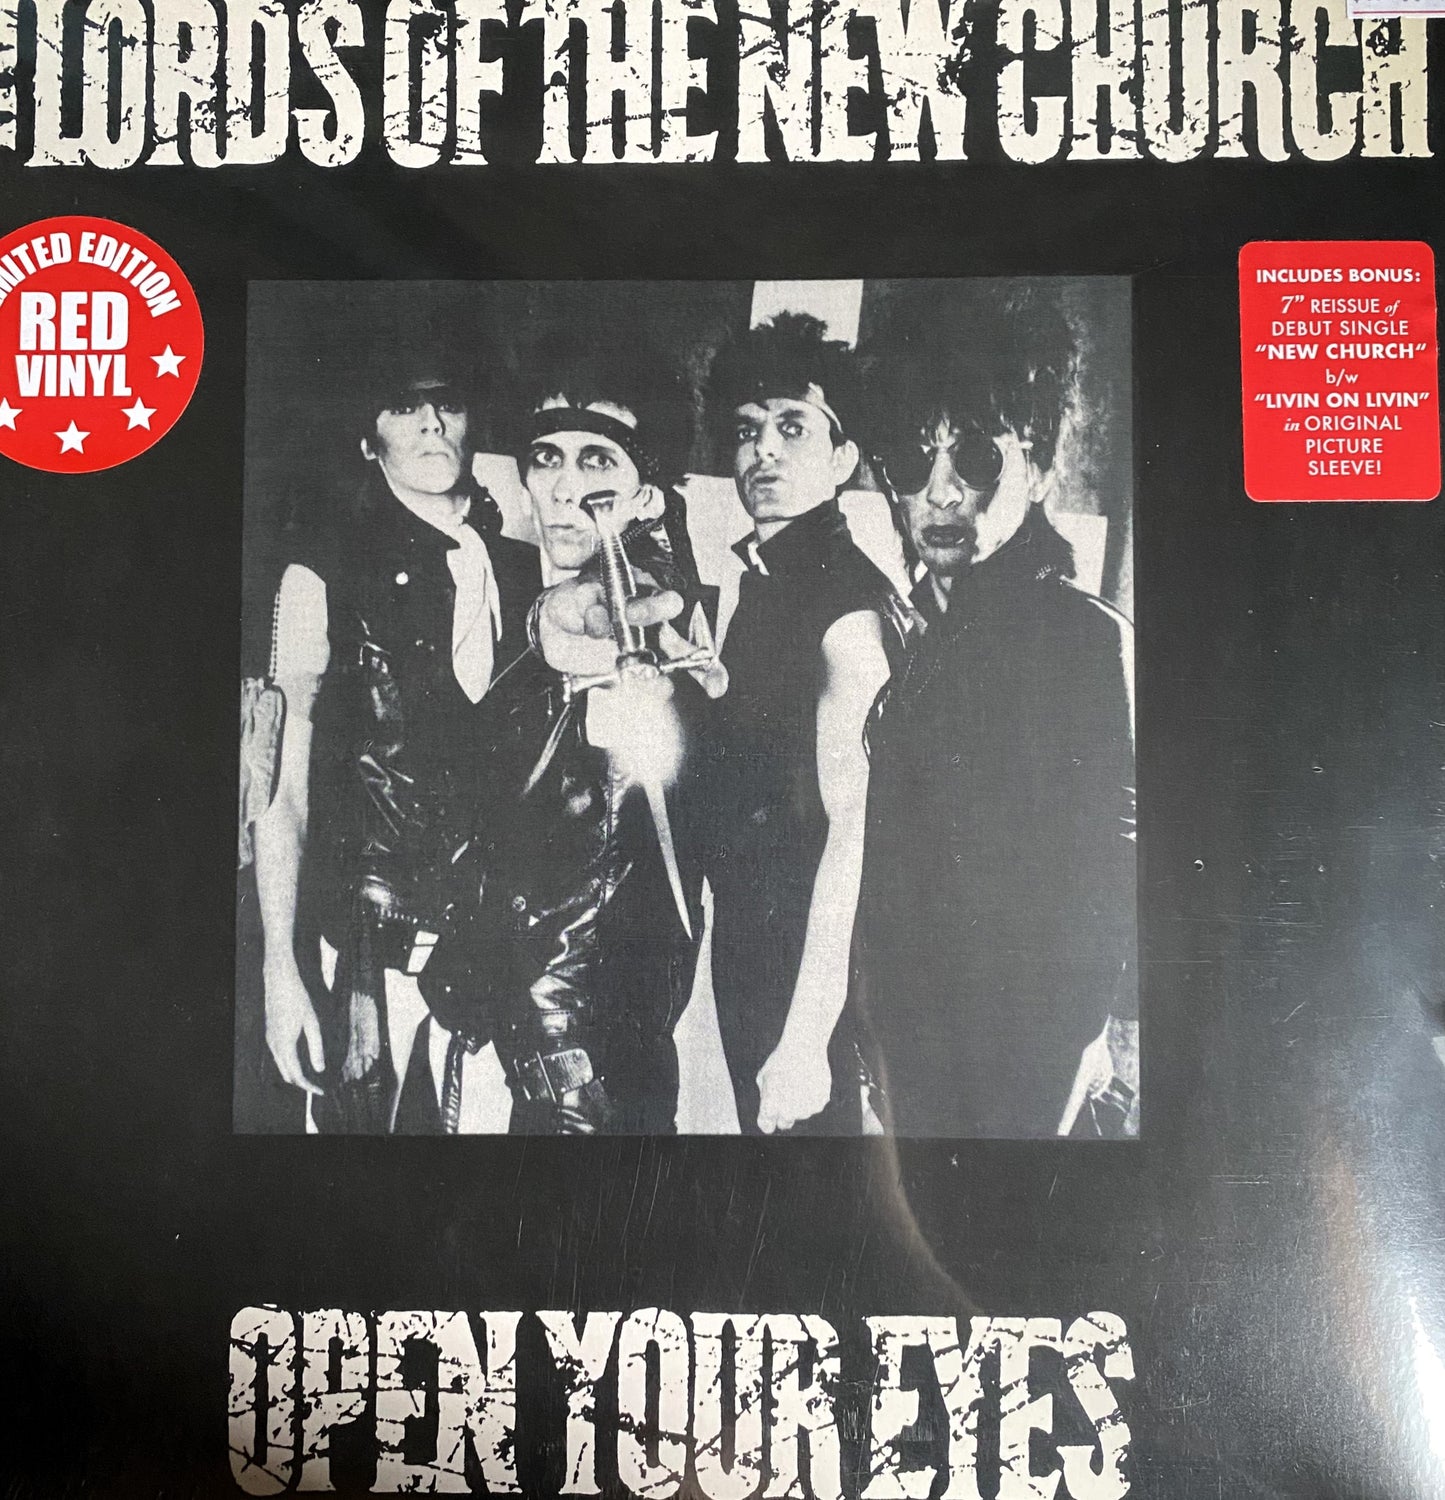 LORDS OF THE NEW CHURCH – Open Your Eyes LP (red vinyl) + 7"